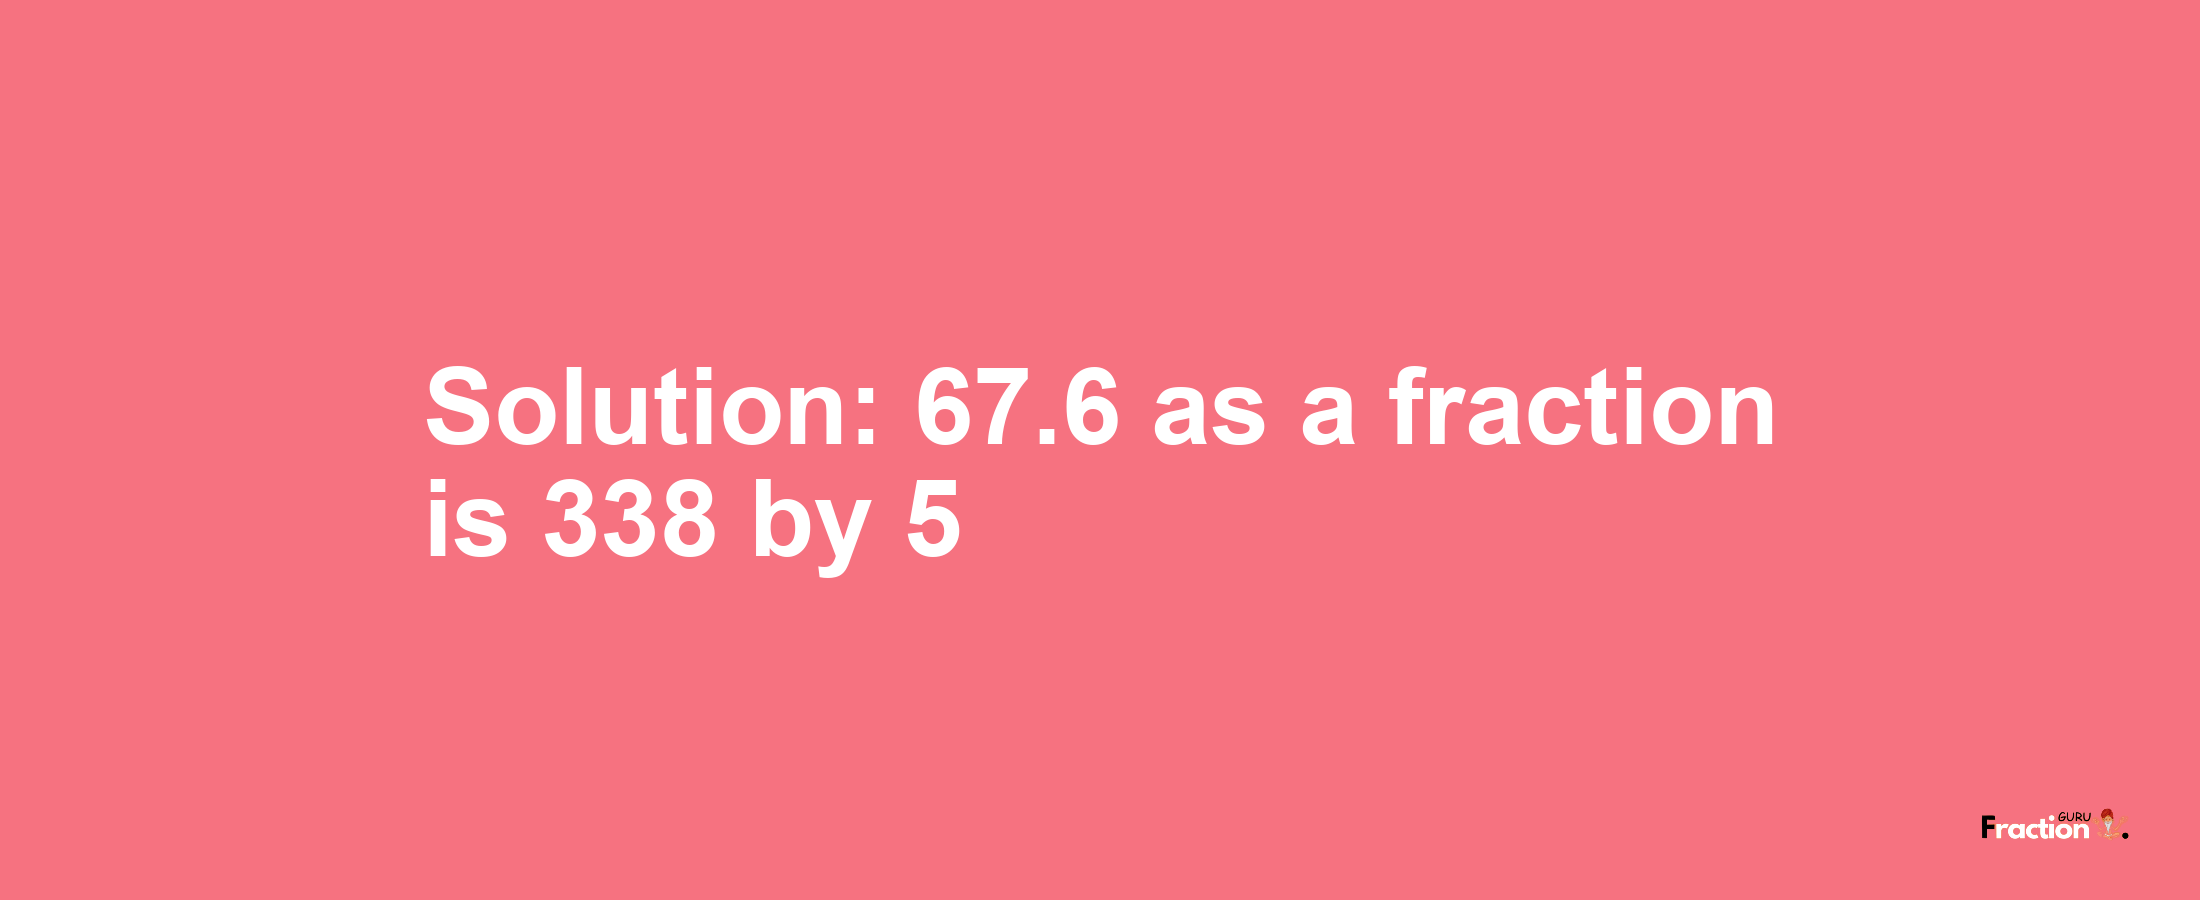 Solution:67.6 as a fraction is 338/5